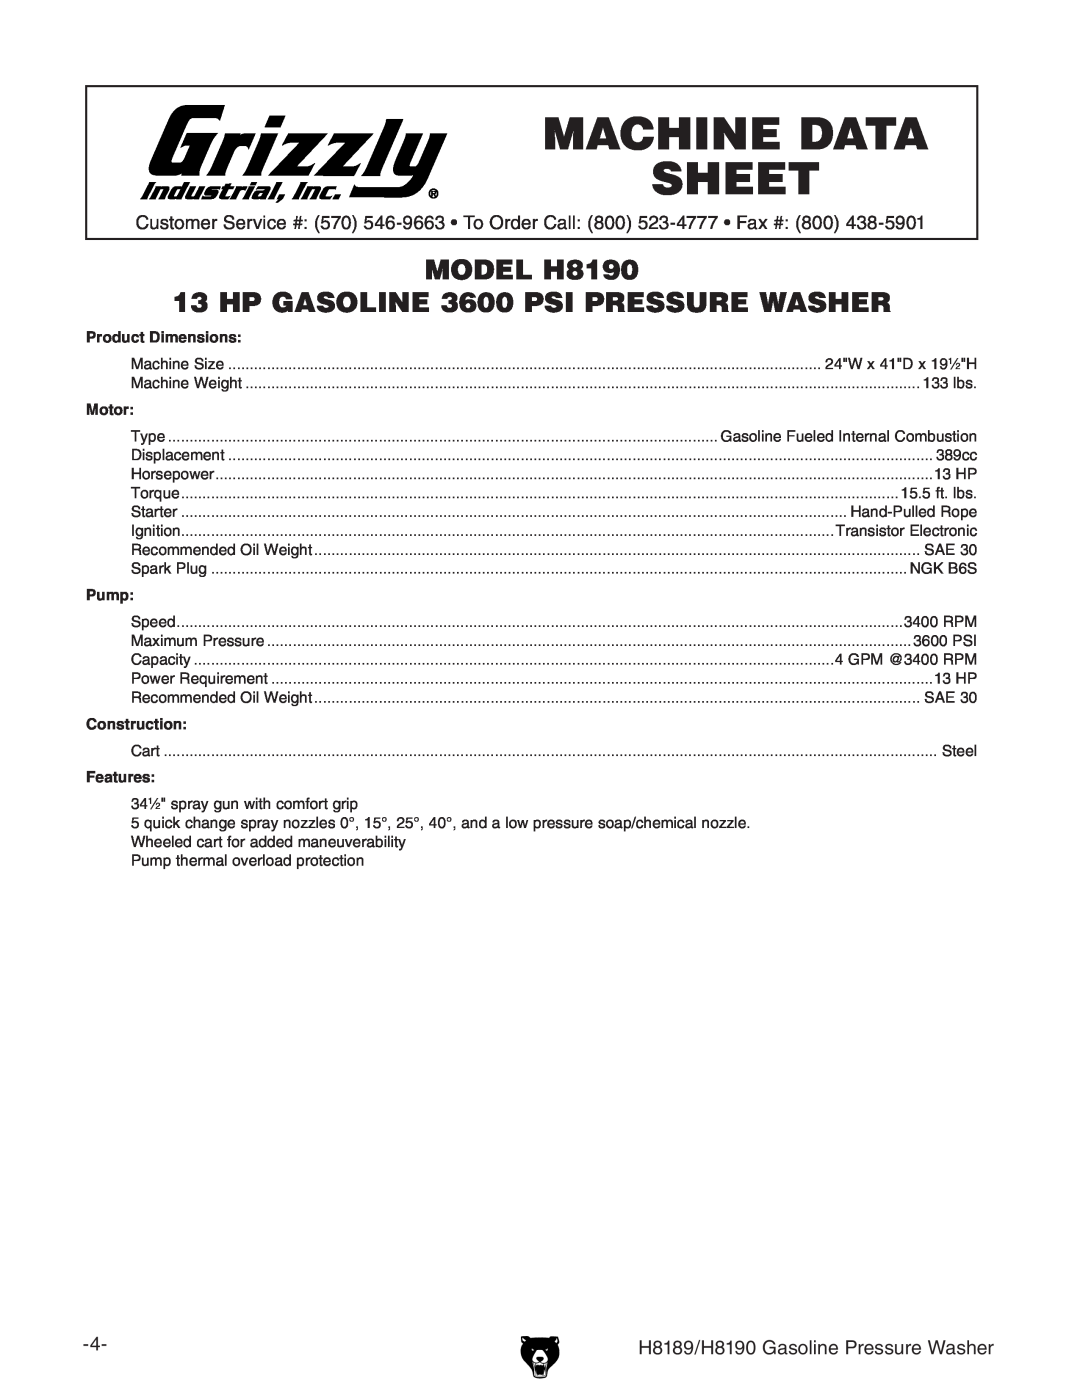 Grizzly owner manual H8189/H8190 Gasoline Pressure Washer 